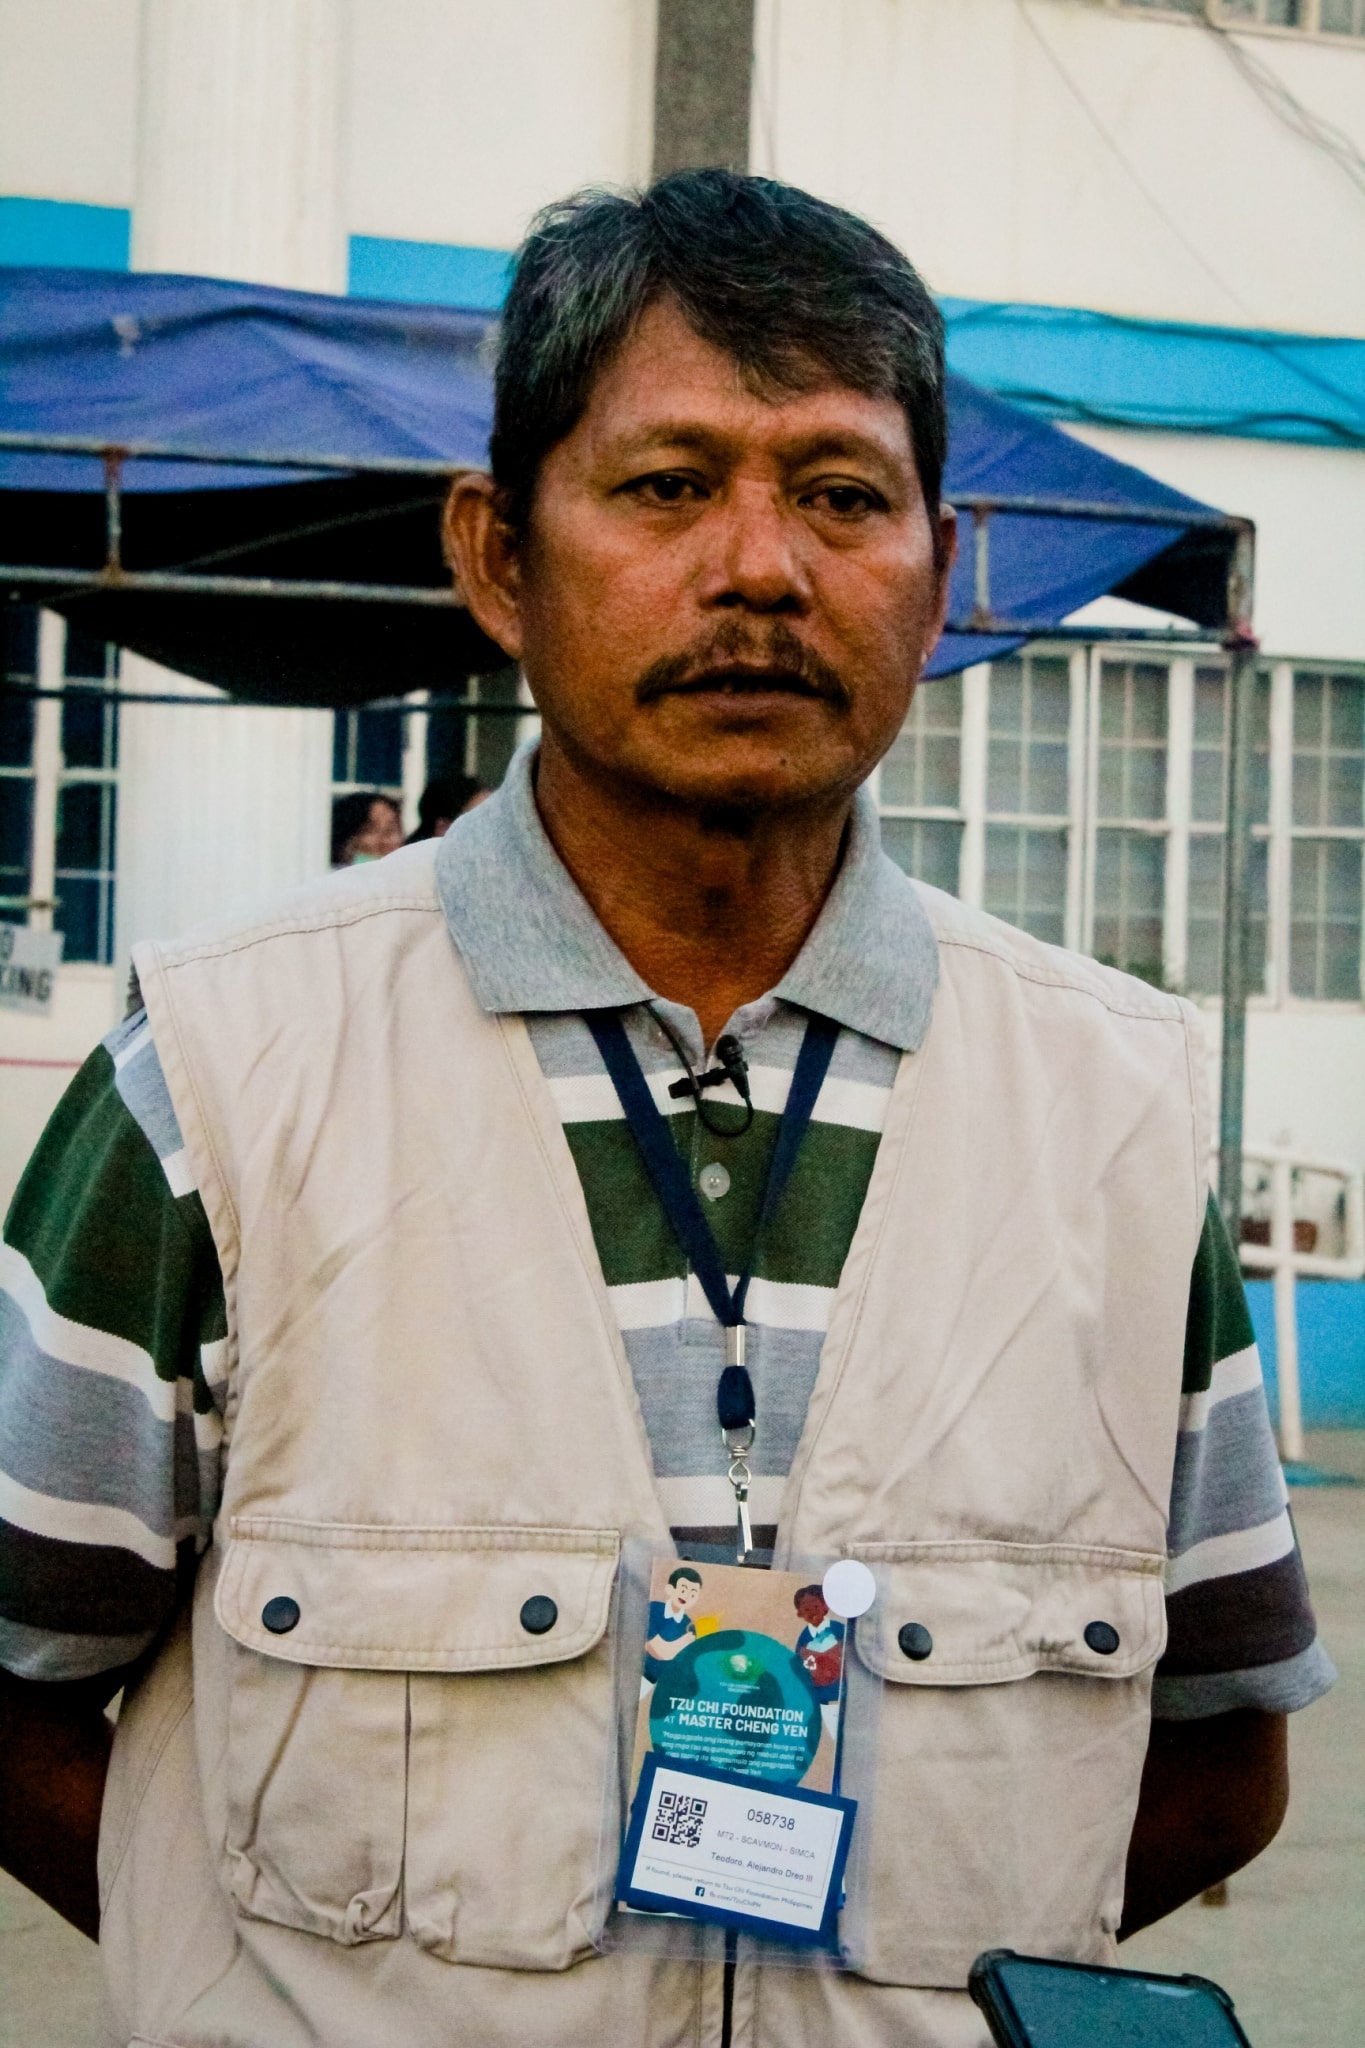 San Isidro Montalban Classifiers Association (SIMCA) President Alejandro Teodoro III was a marine and former bodyguard who left that life to live and work among scavengers. 